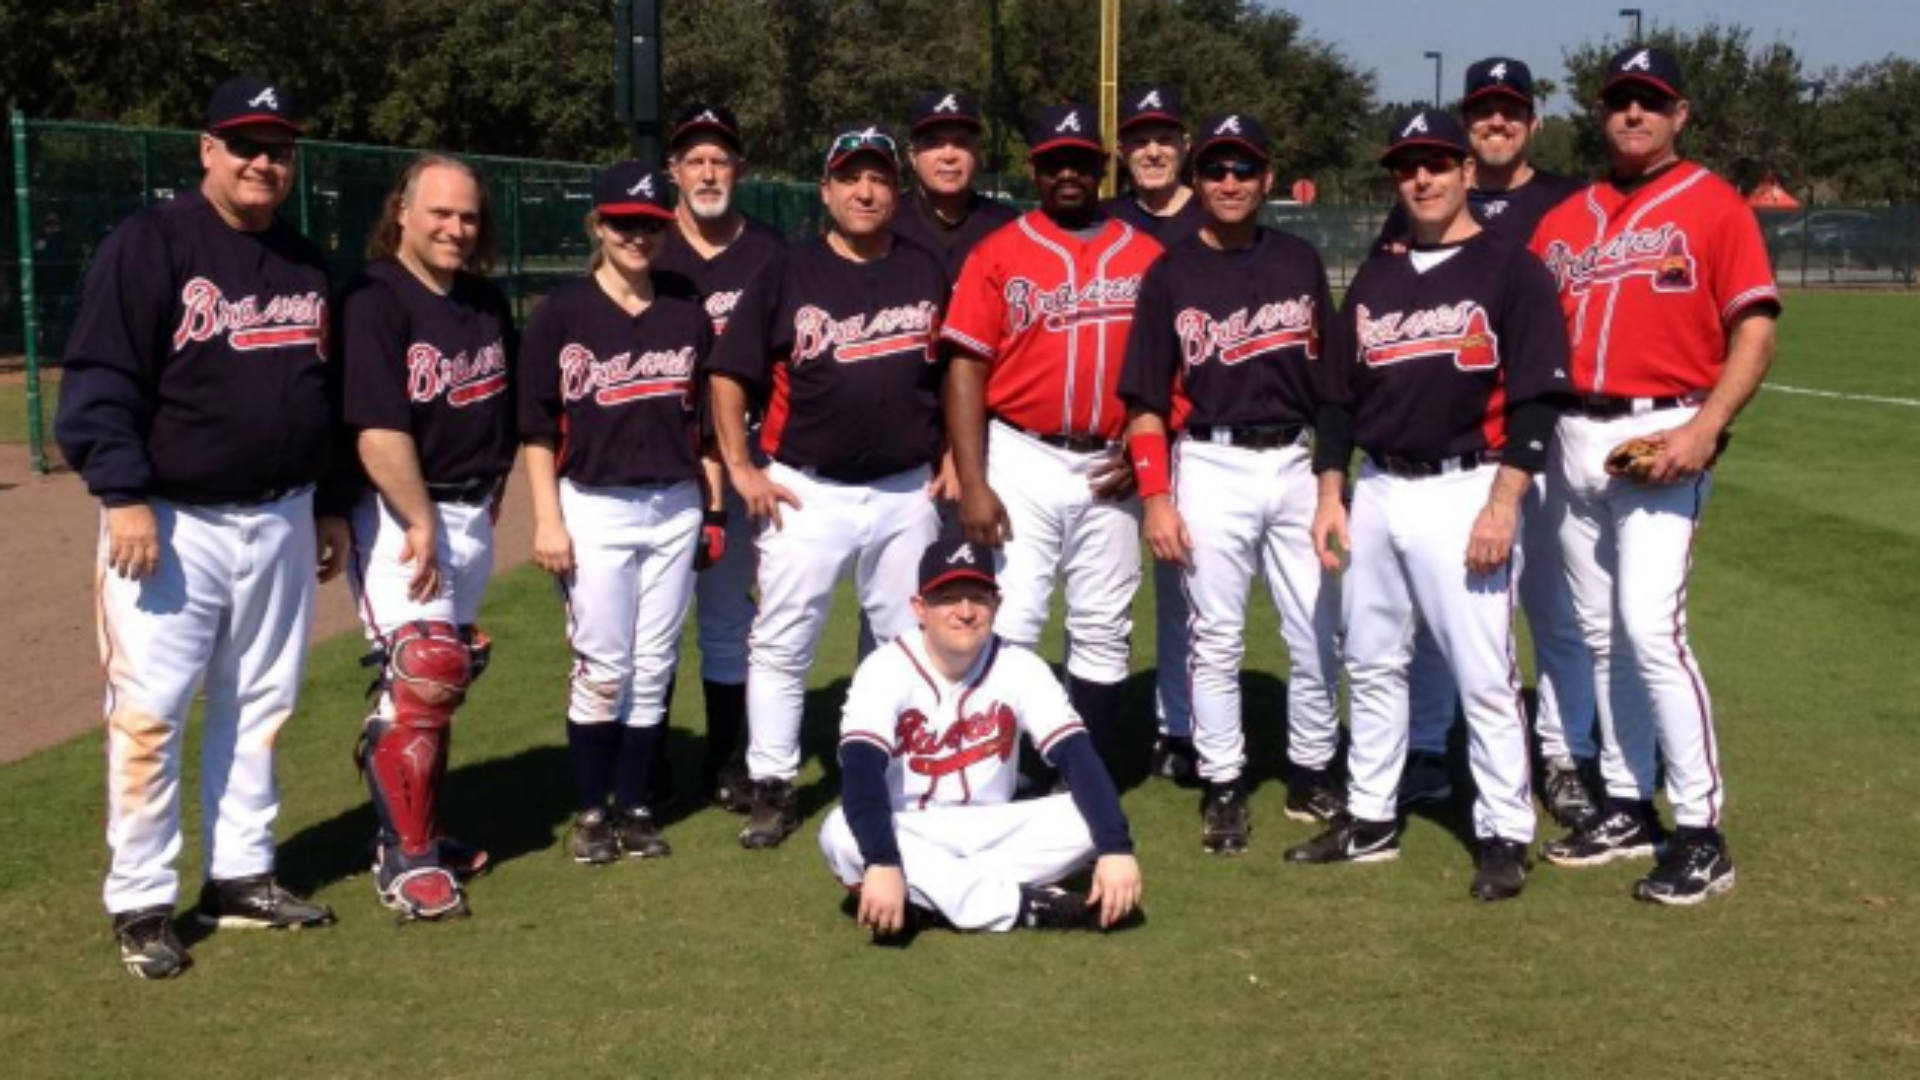 10 things you learn at an MLB fantasy camp World Sports Tale